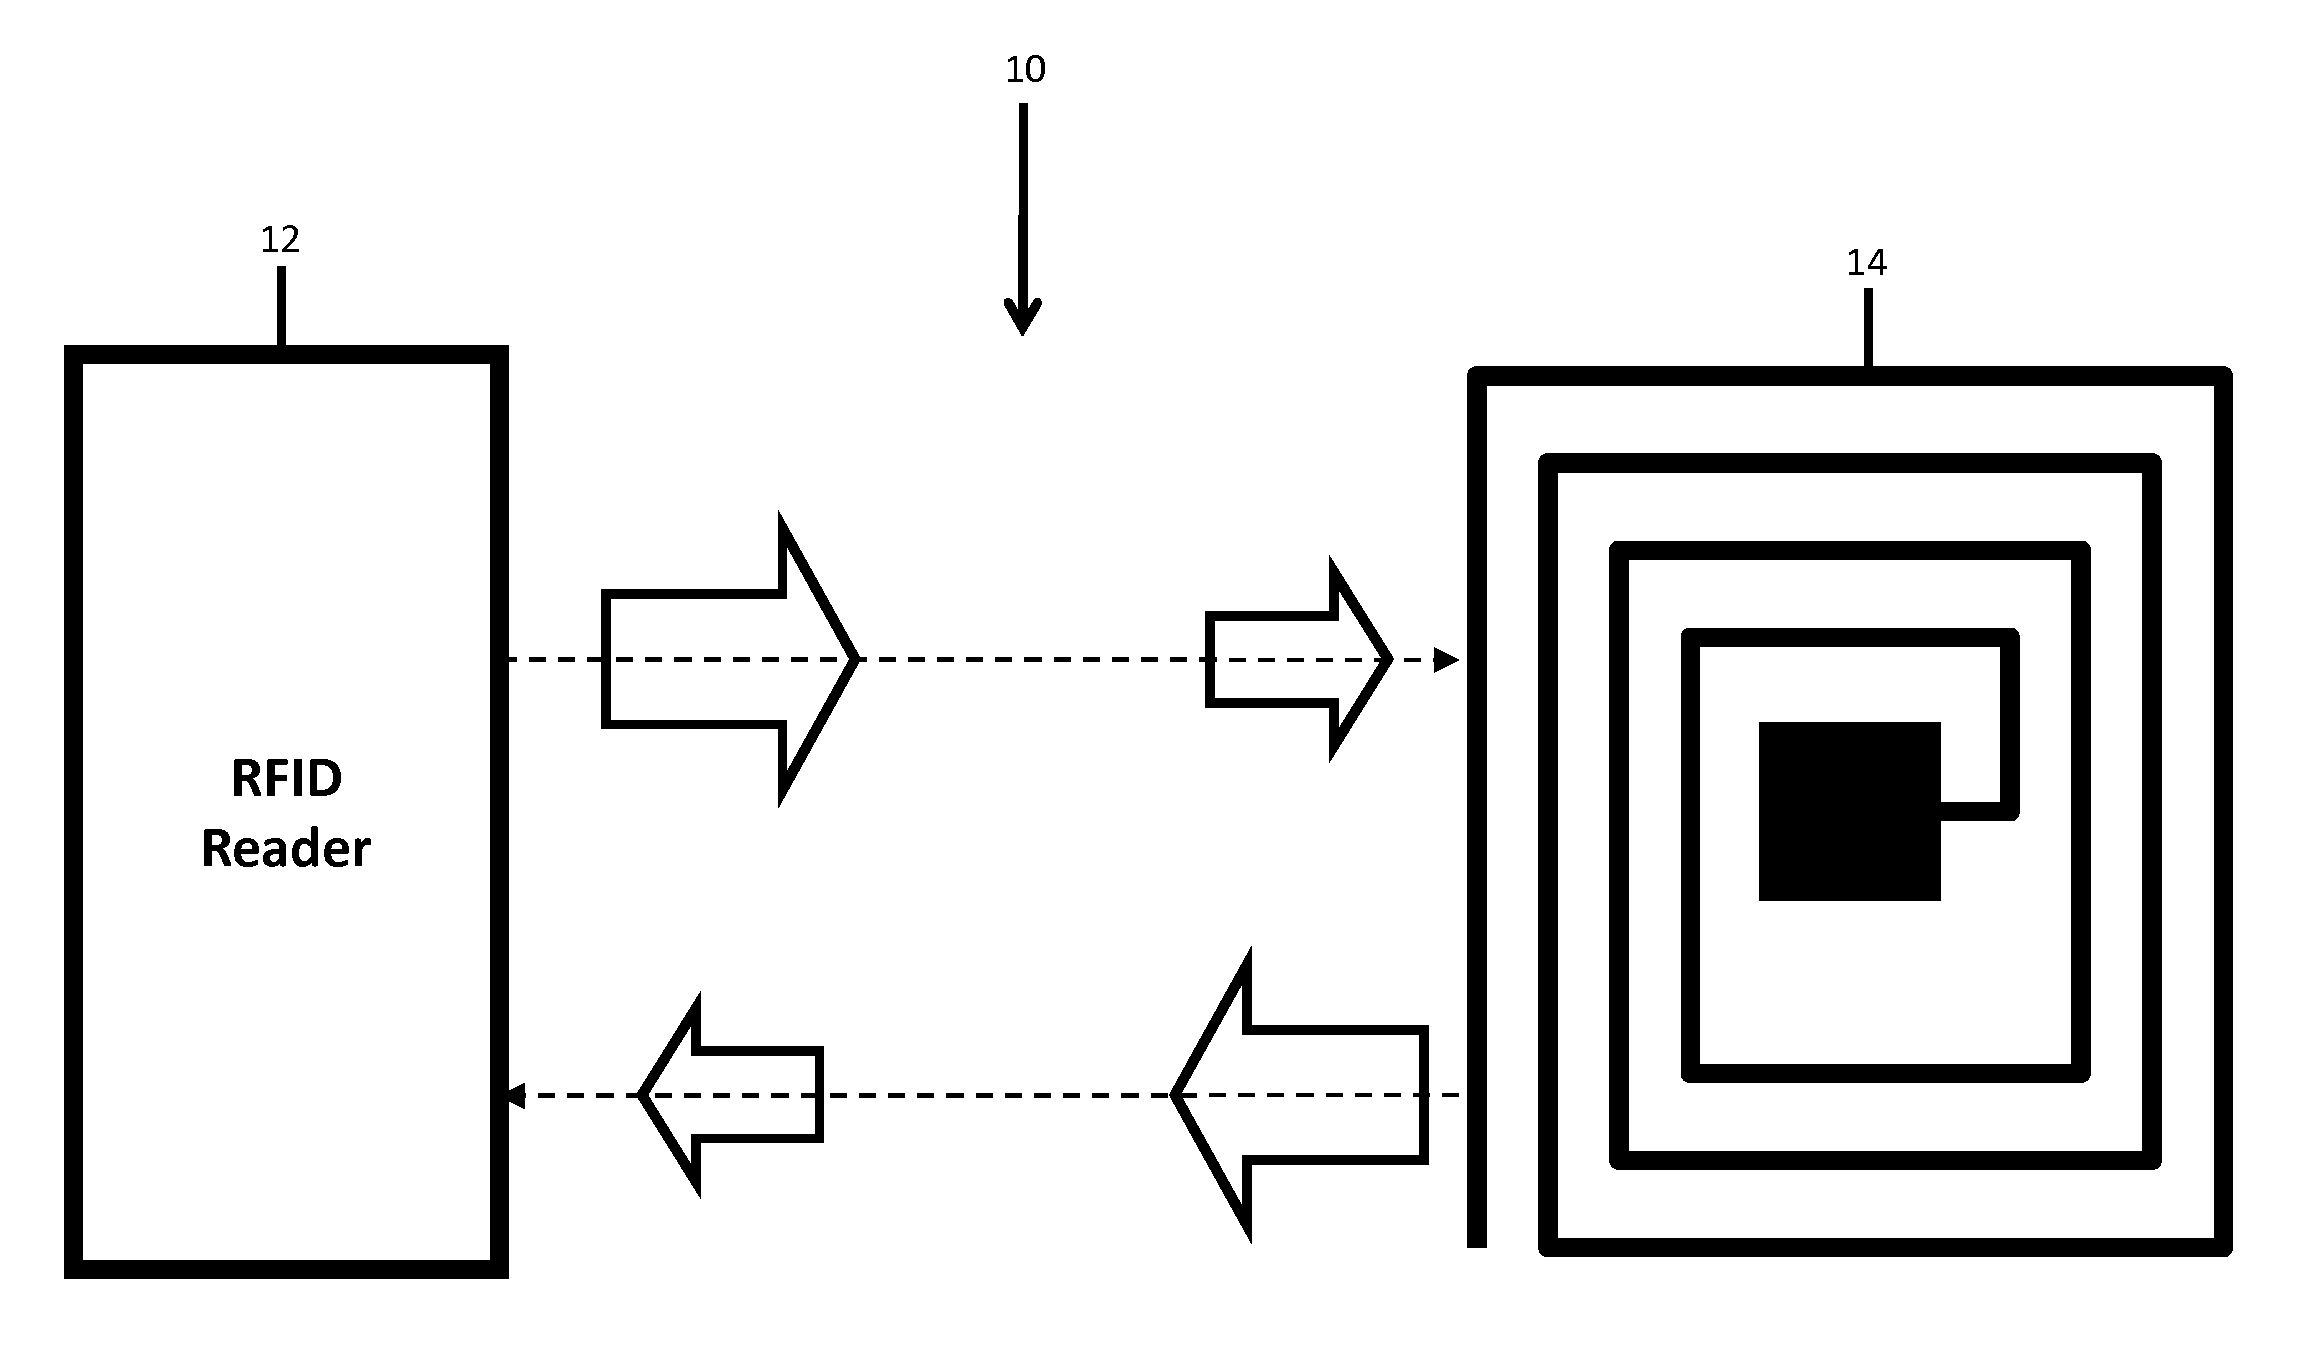 Automated card information exchange pursuant to a commercial transaction